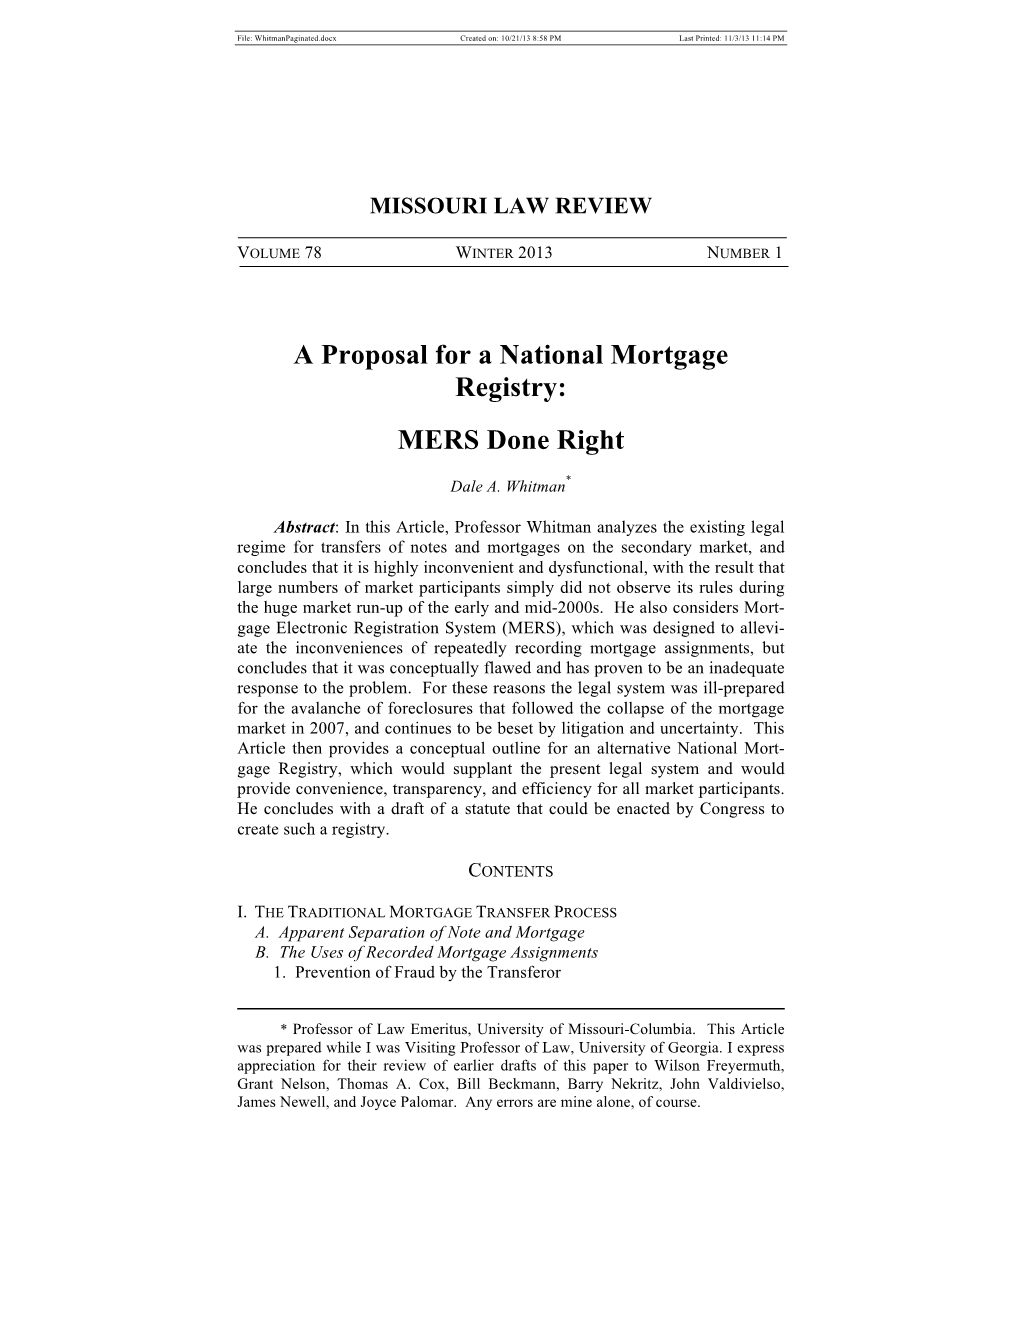 A Proposal for a National Mortgage Registry: MERS Done Right